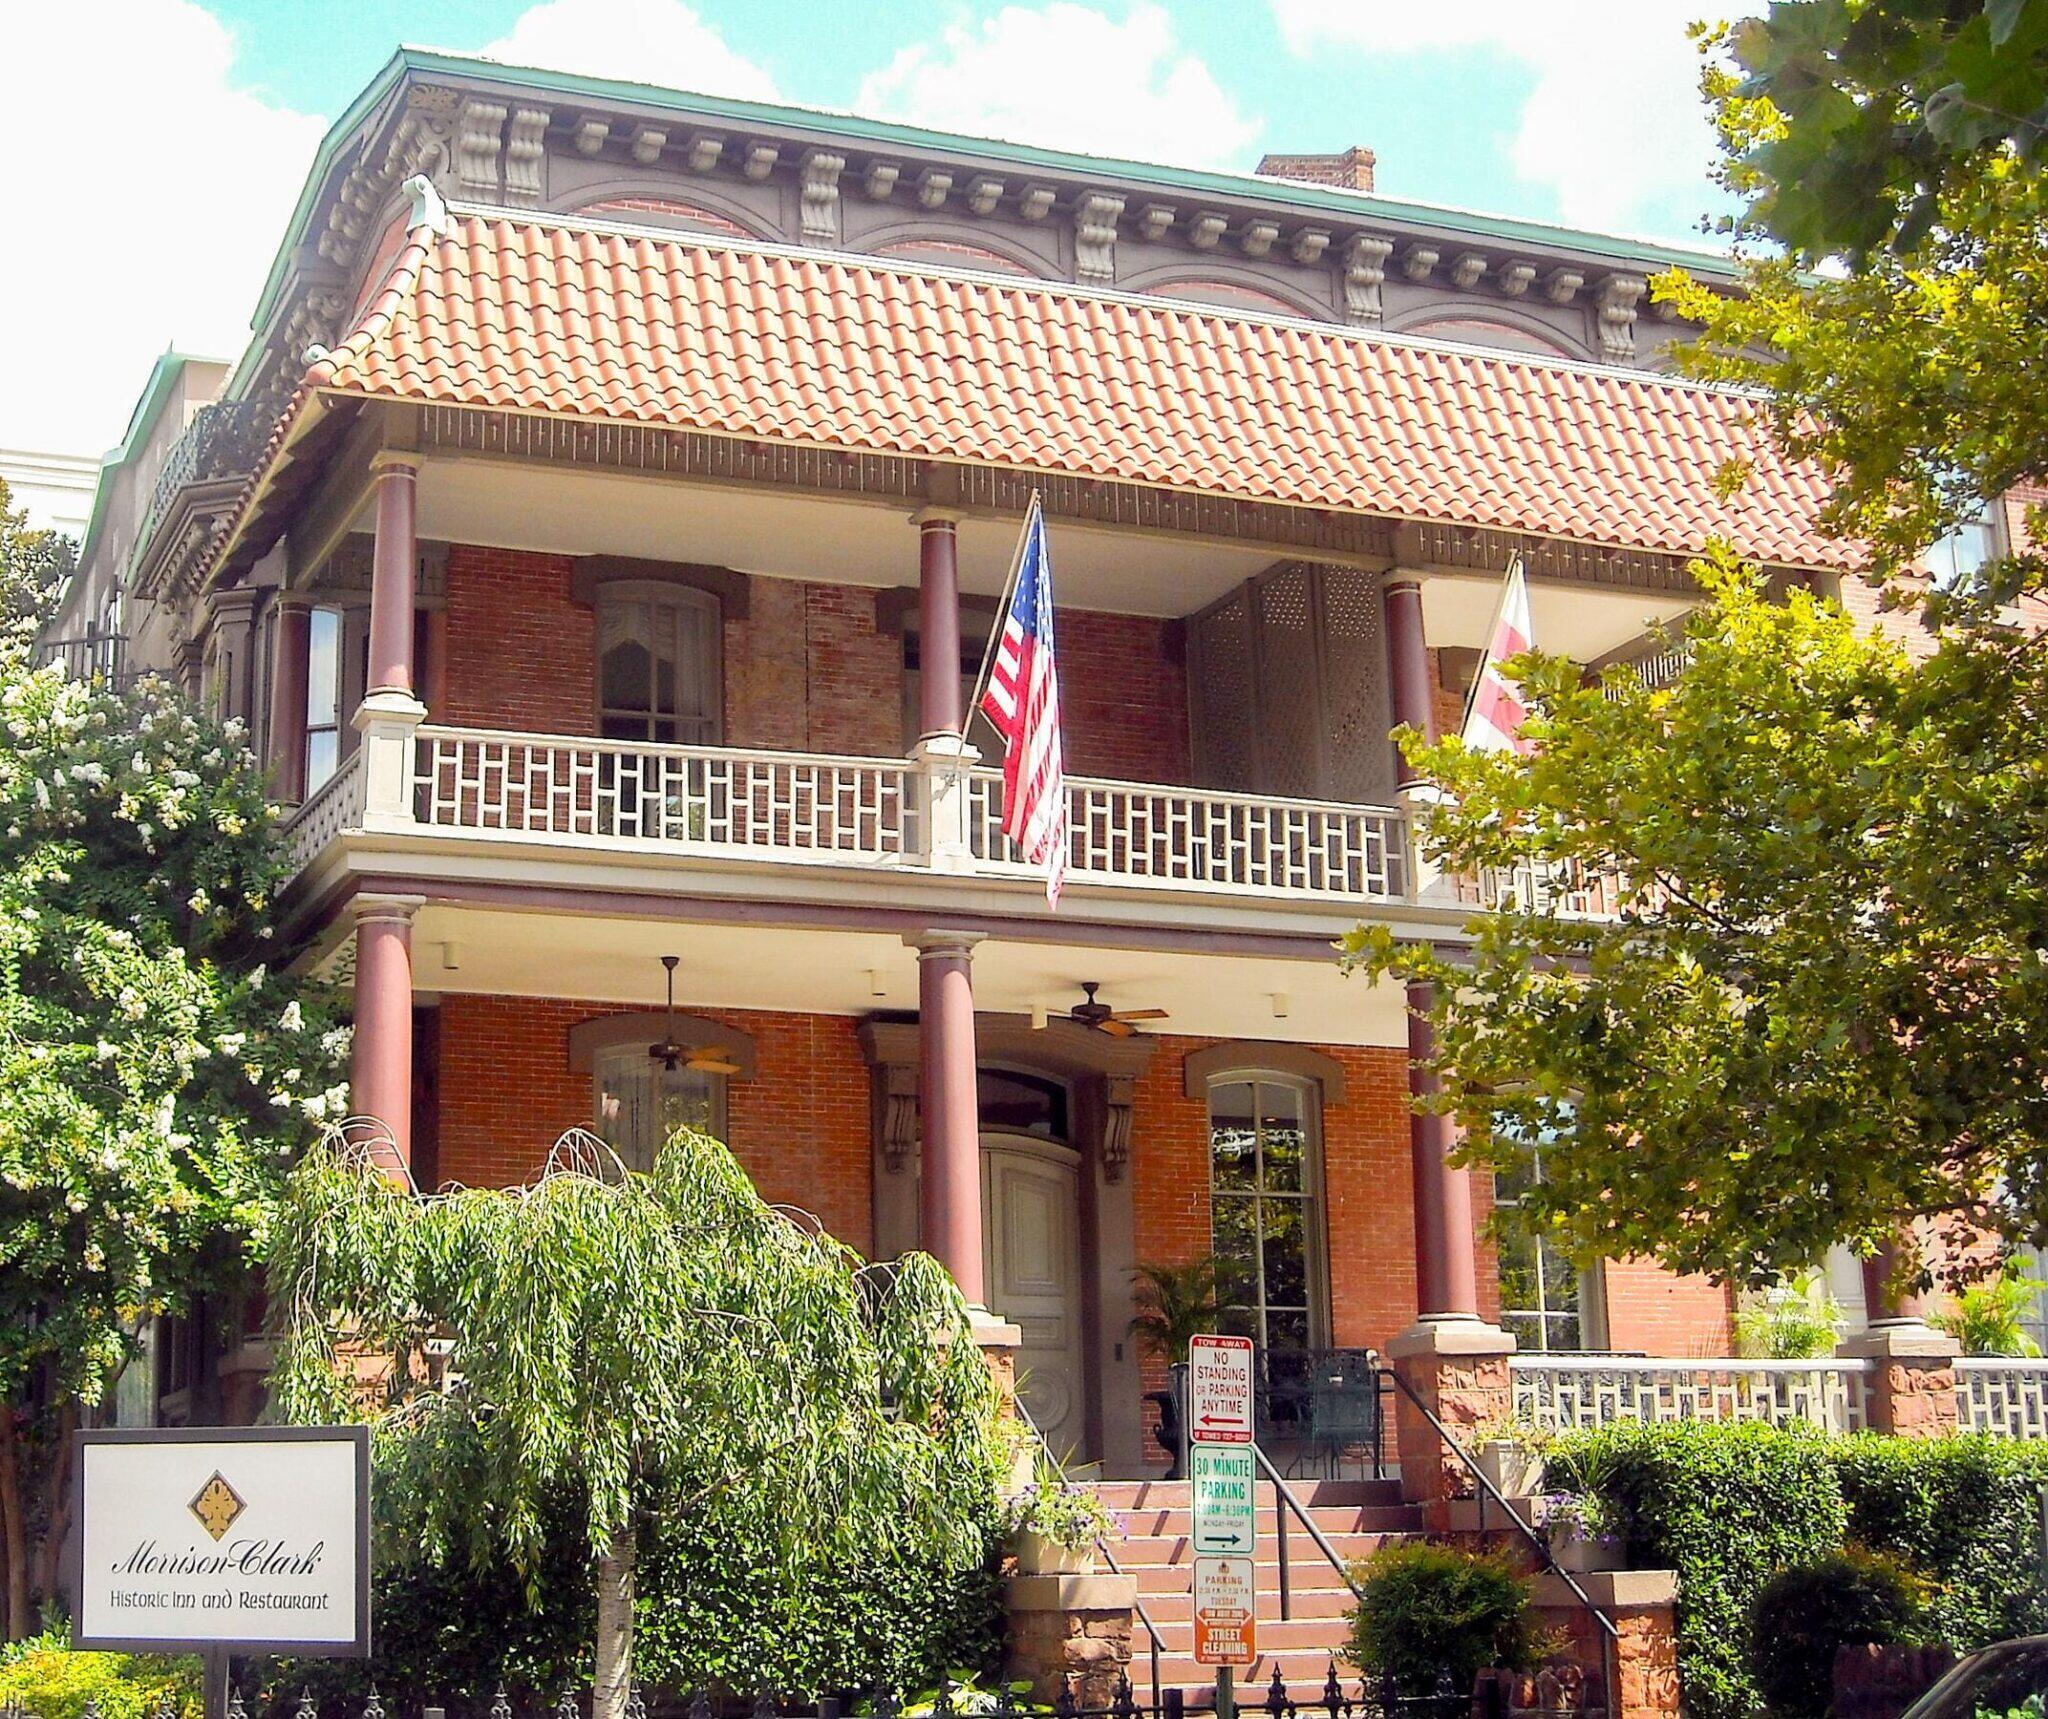 <a href='https://www.fodors.com/world/north-america/usa/washington-dc/experiences/news/photos/best-historic-hotels-in-washington-d-c#'>From &quot;The 10 Best Historic Hotels in Washington D.C.: Morrison-Clark Historic Inn&quot;</a>